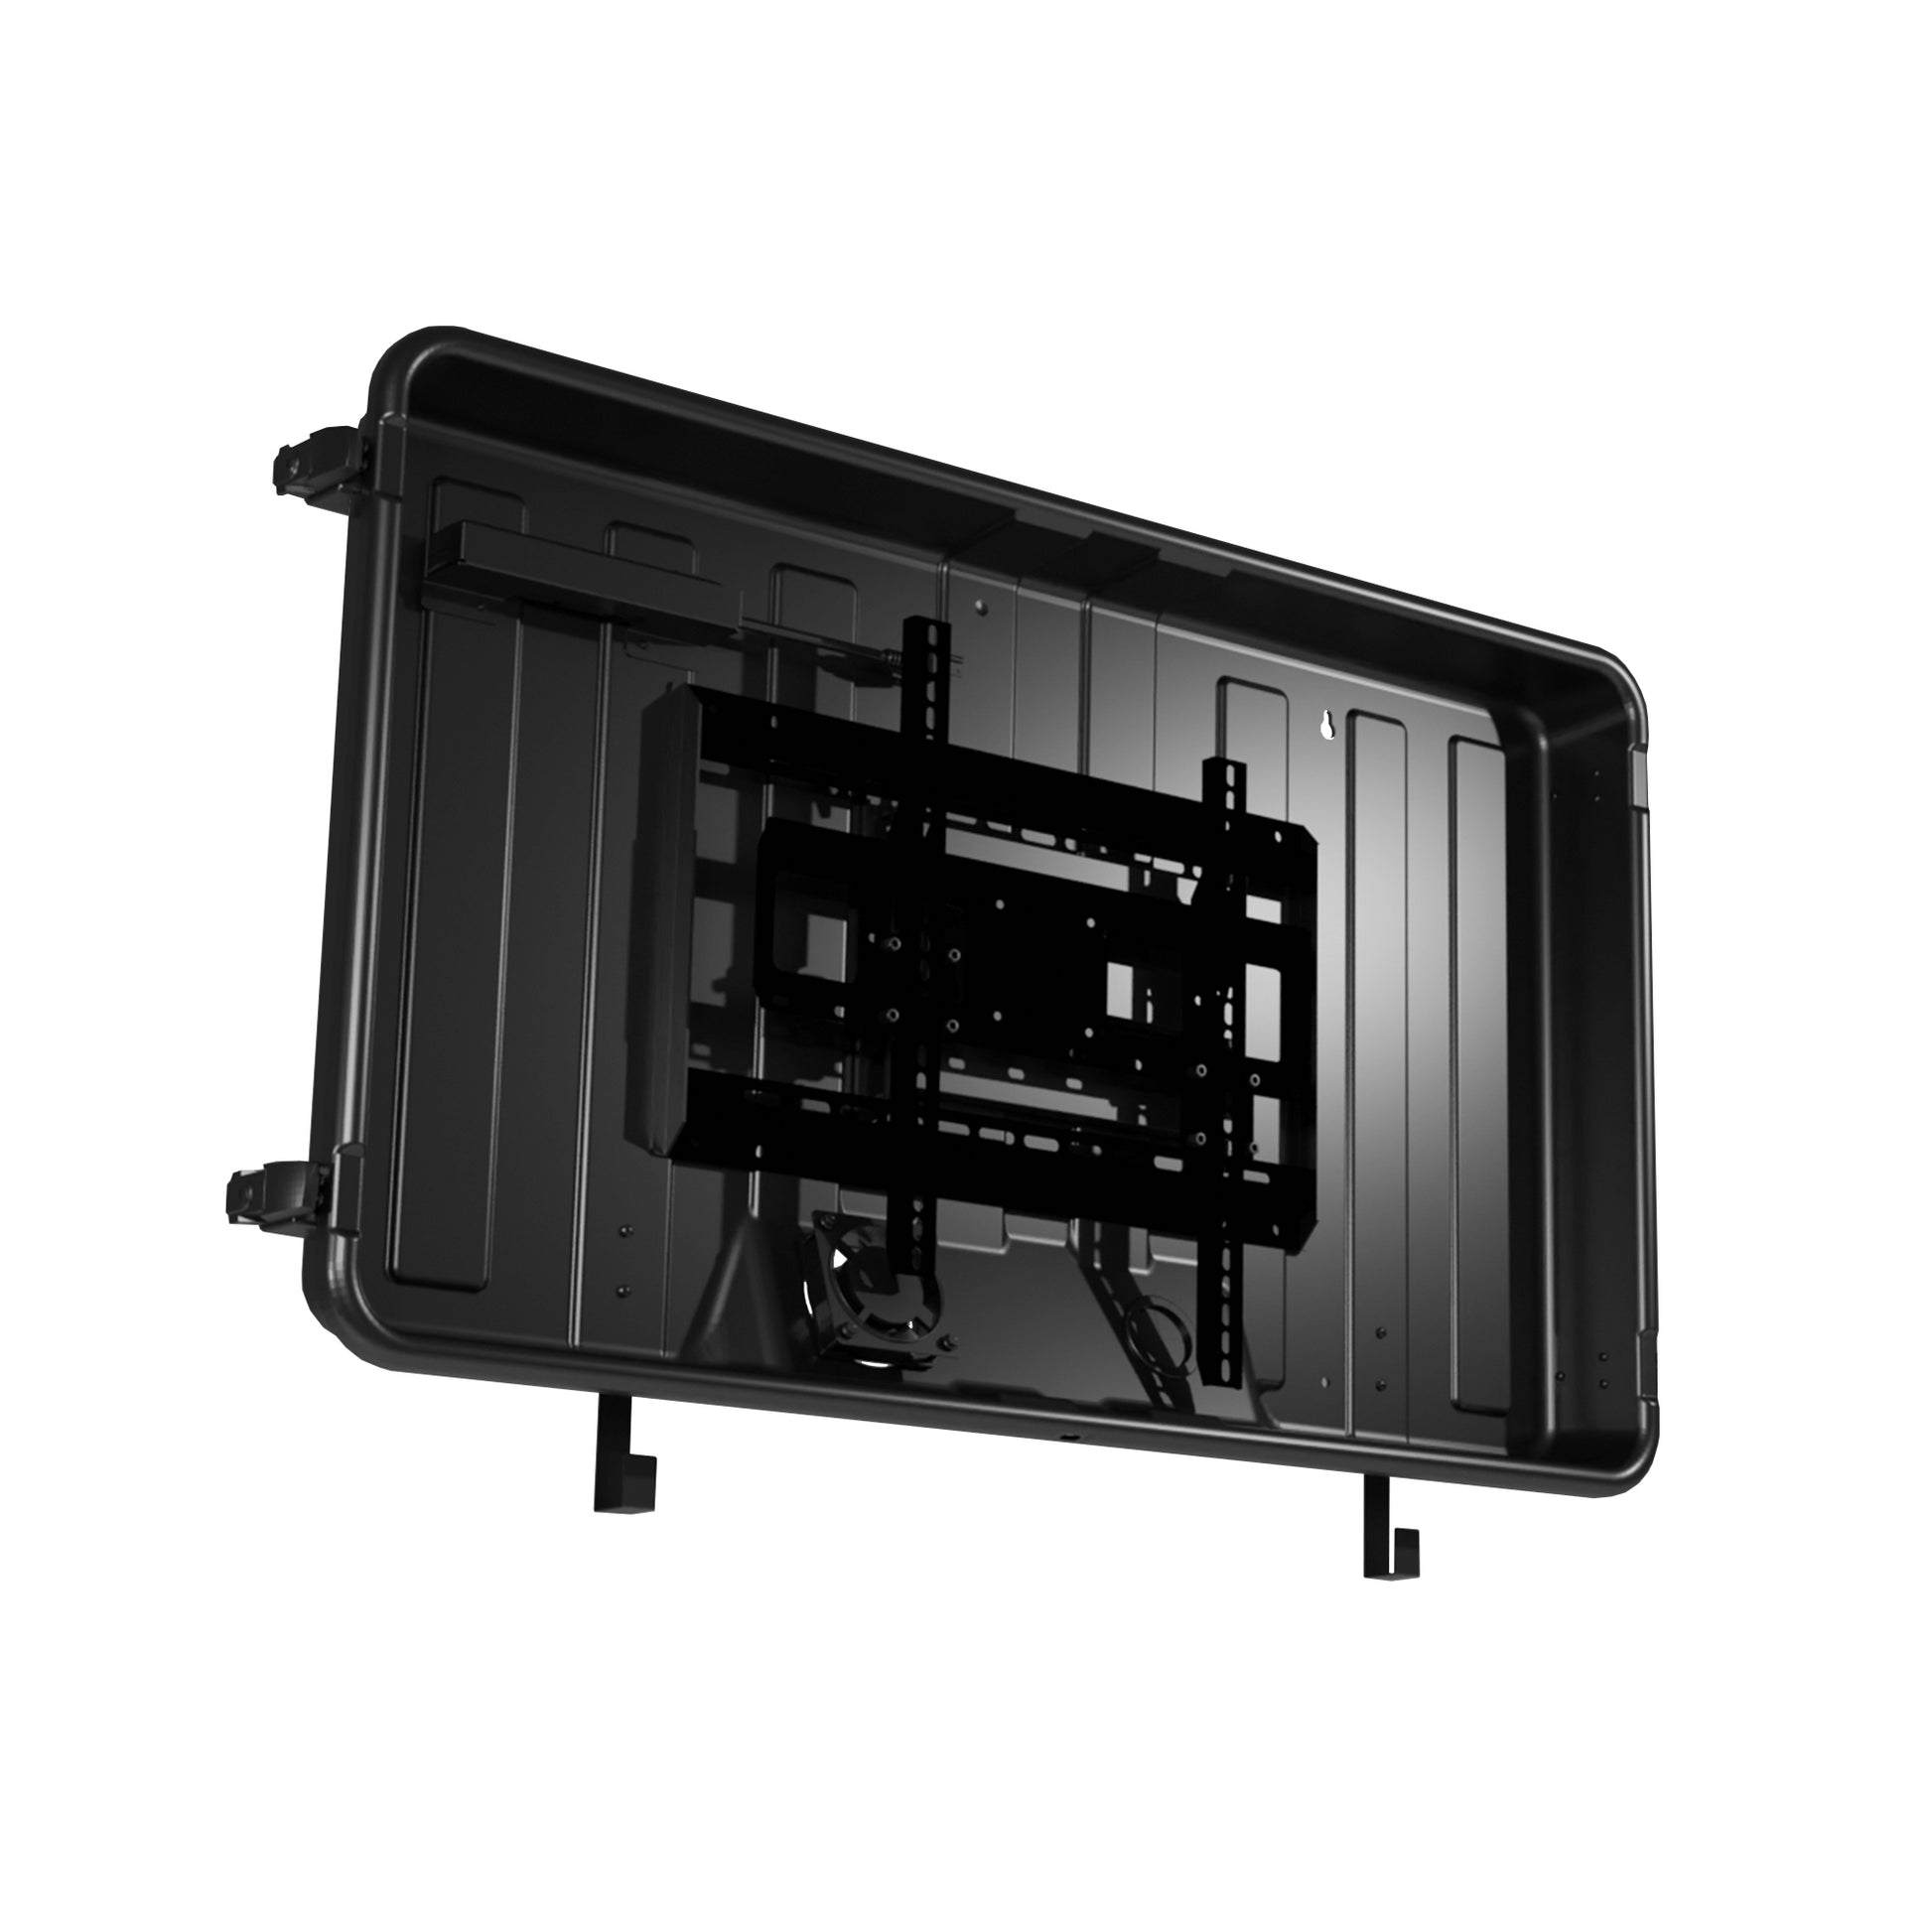 Storm Shell Outdoor Weatherproof TV Enclosure  with ariticulating arm and mounting hardware. Fits up to 44" TV  with front cover removed